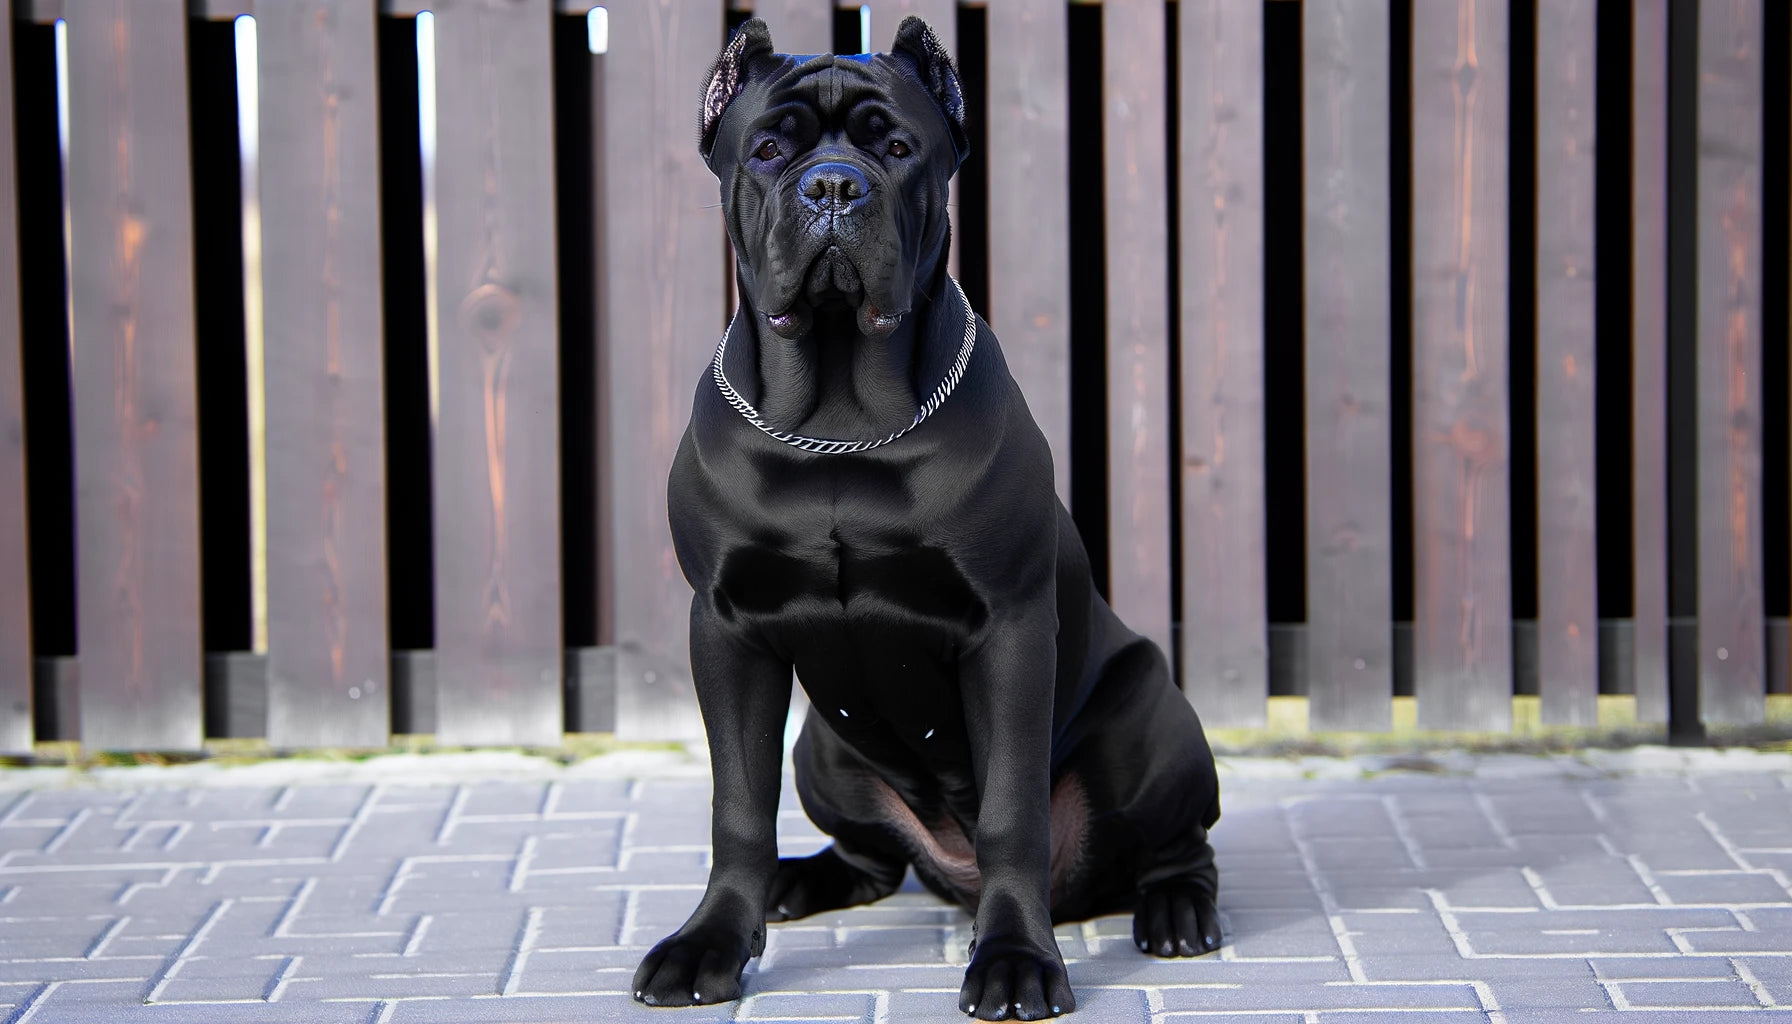 Black Cane Corso dog sitting in a dignified pose